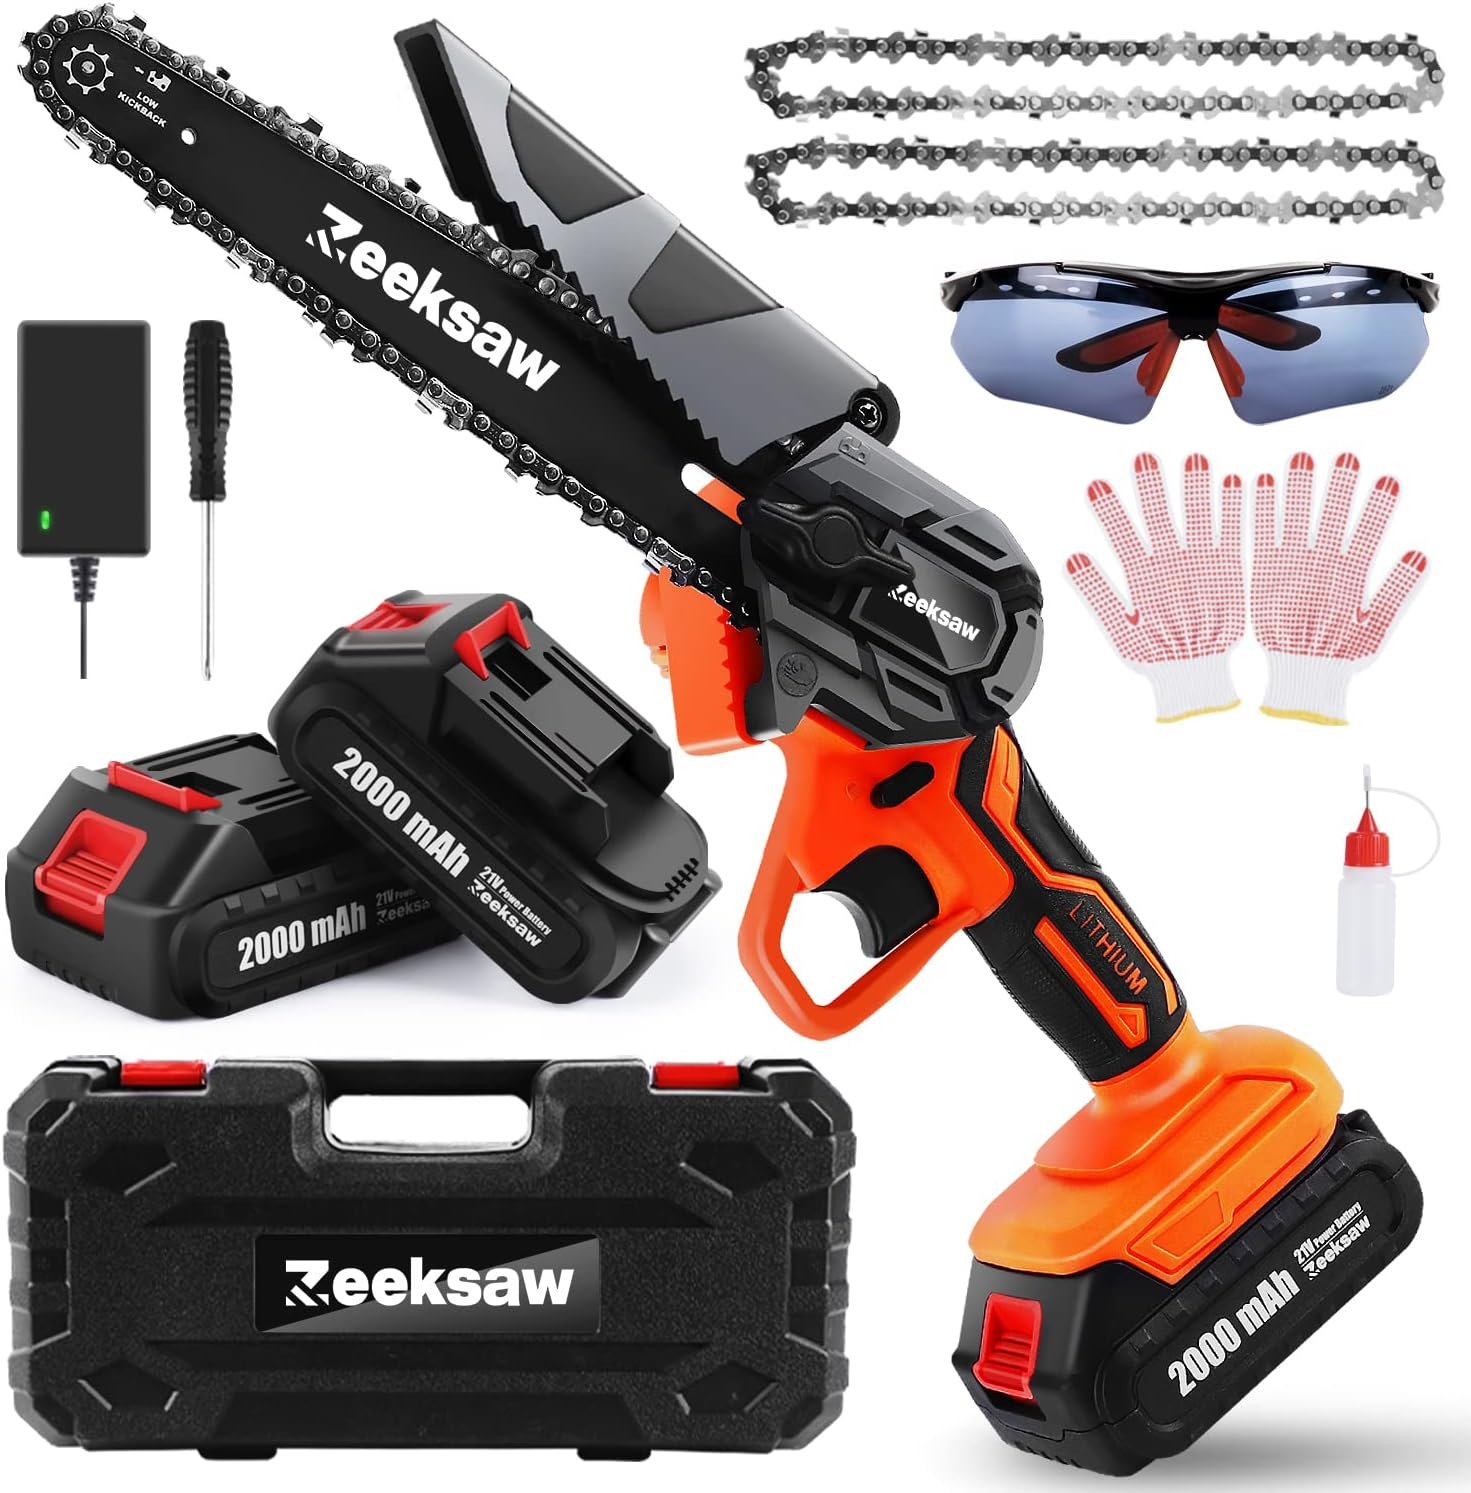 6 Inch Cordless Chainsaw Review